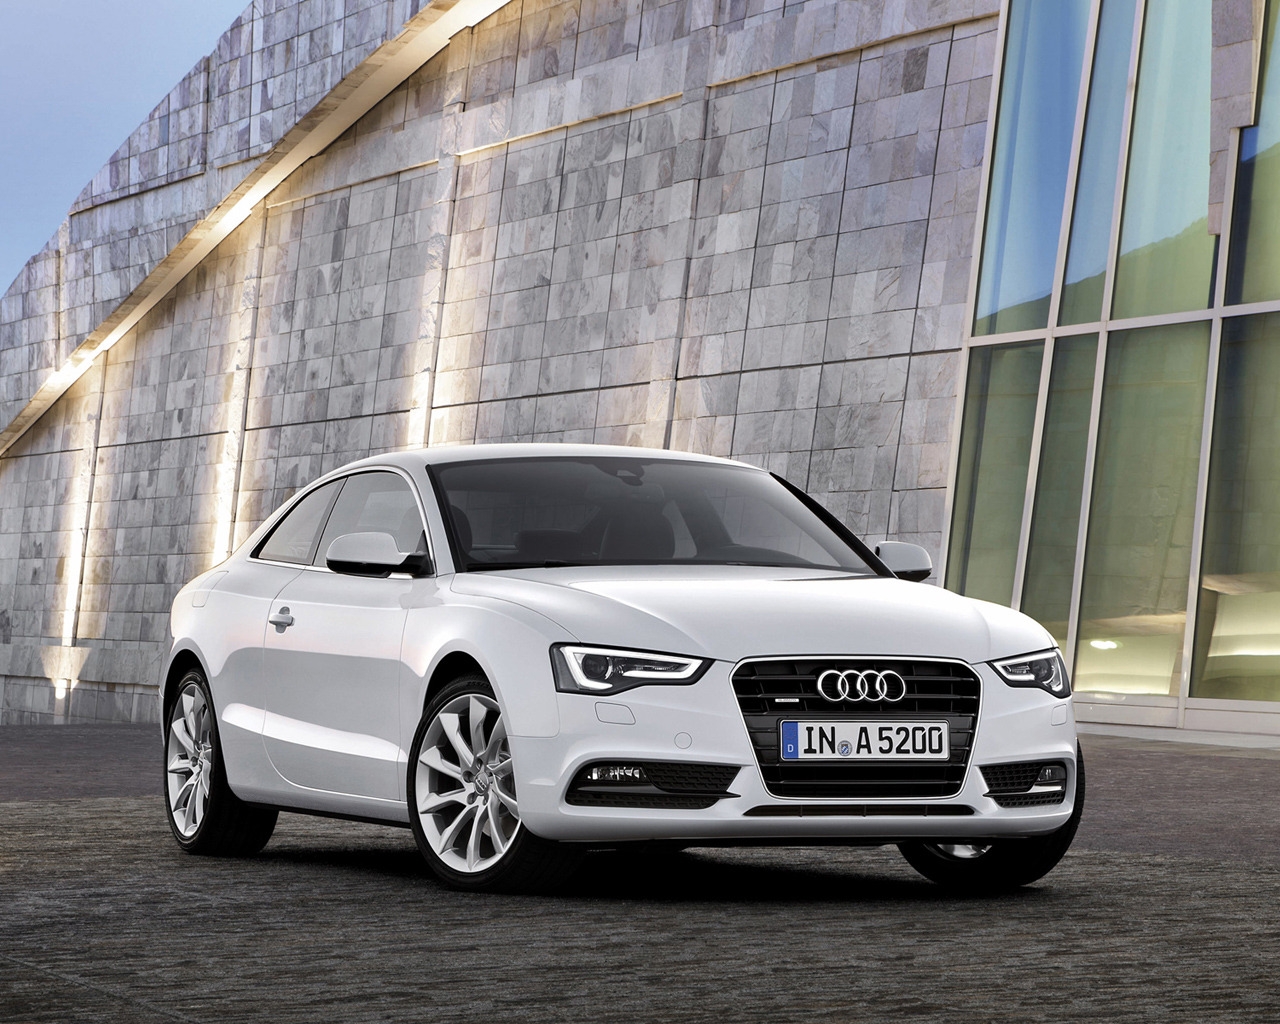 2012 Audi A5 Coupe for 1280 x 1024 resolution